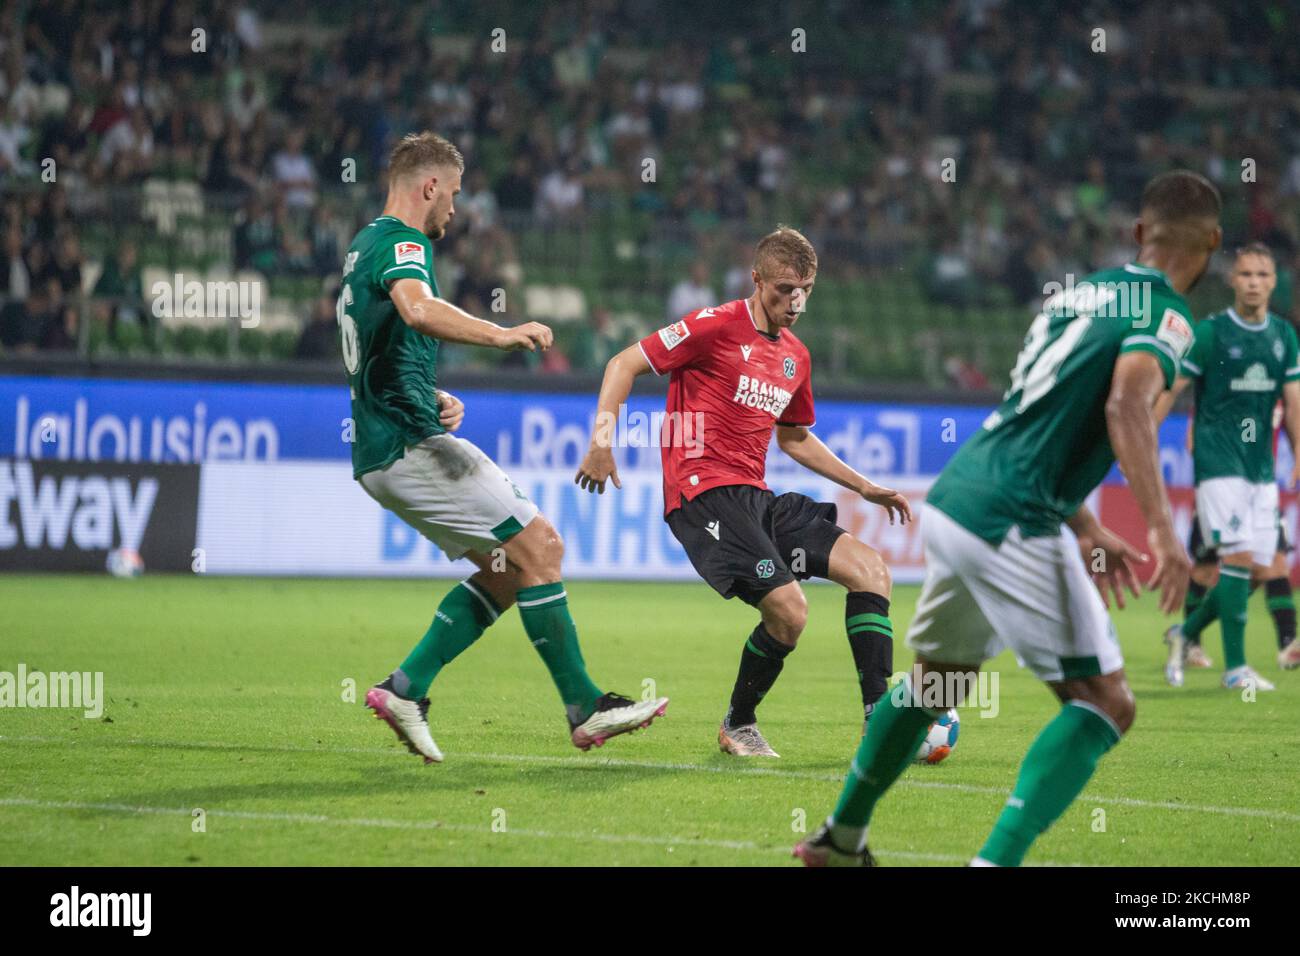 Lars Lukas Mai (left) of SV Werder Bremen and Sebastian Ernst (second from left) of Hannover 96 vie at the ball during the Second Bundesliga match between SV Werder Bremen and Hannover 96 at Wohninvest WESERSTADIONr on July 24, 2021 in Bremen, Germany. (Photo by Peter Niedung/NurPhoto) Stock Photo